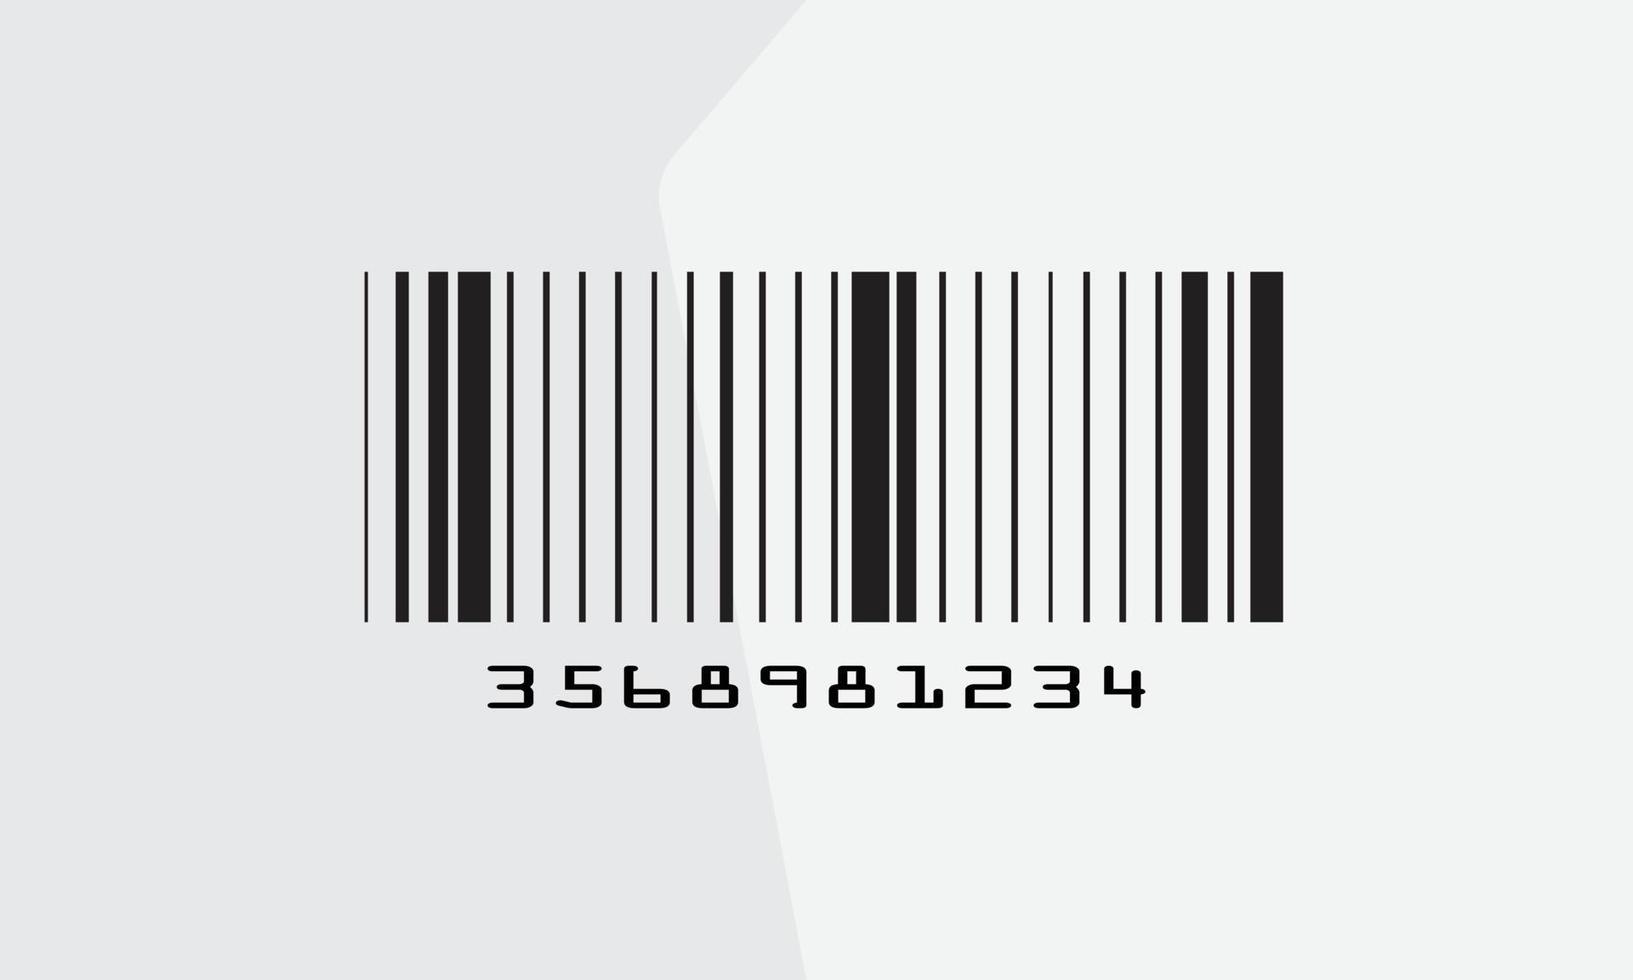 barcode vector icon for product identification number or mark for packging